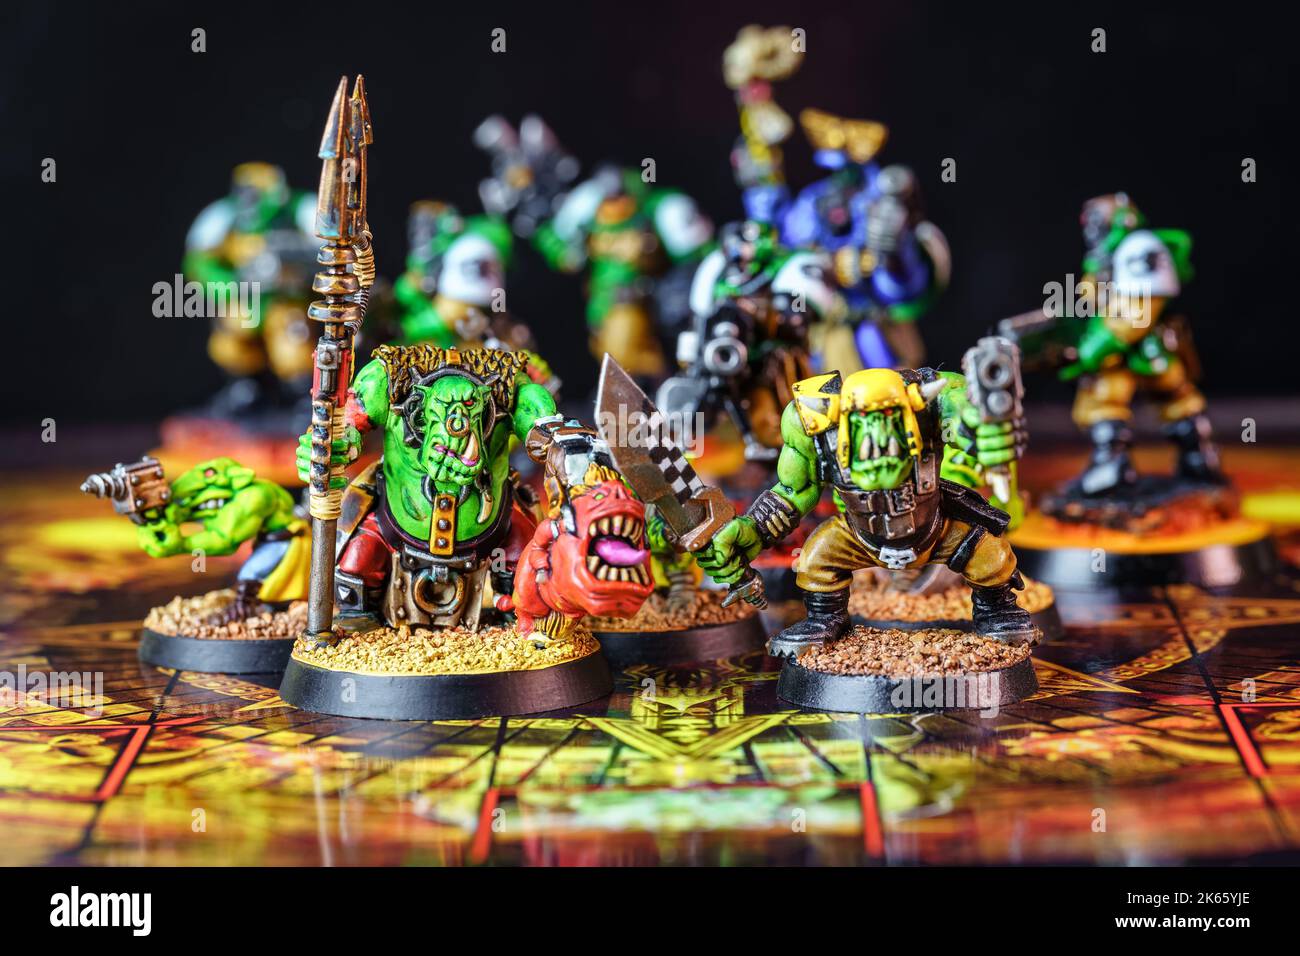 Different figures of warriors to participate in role-playing board games among several participants. Stock Photo